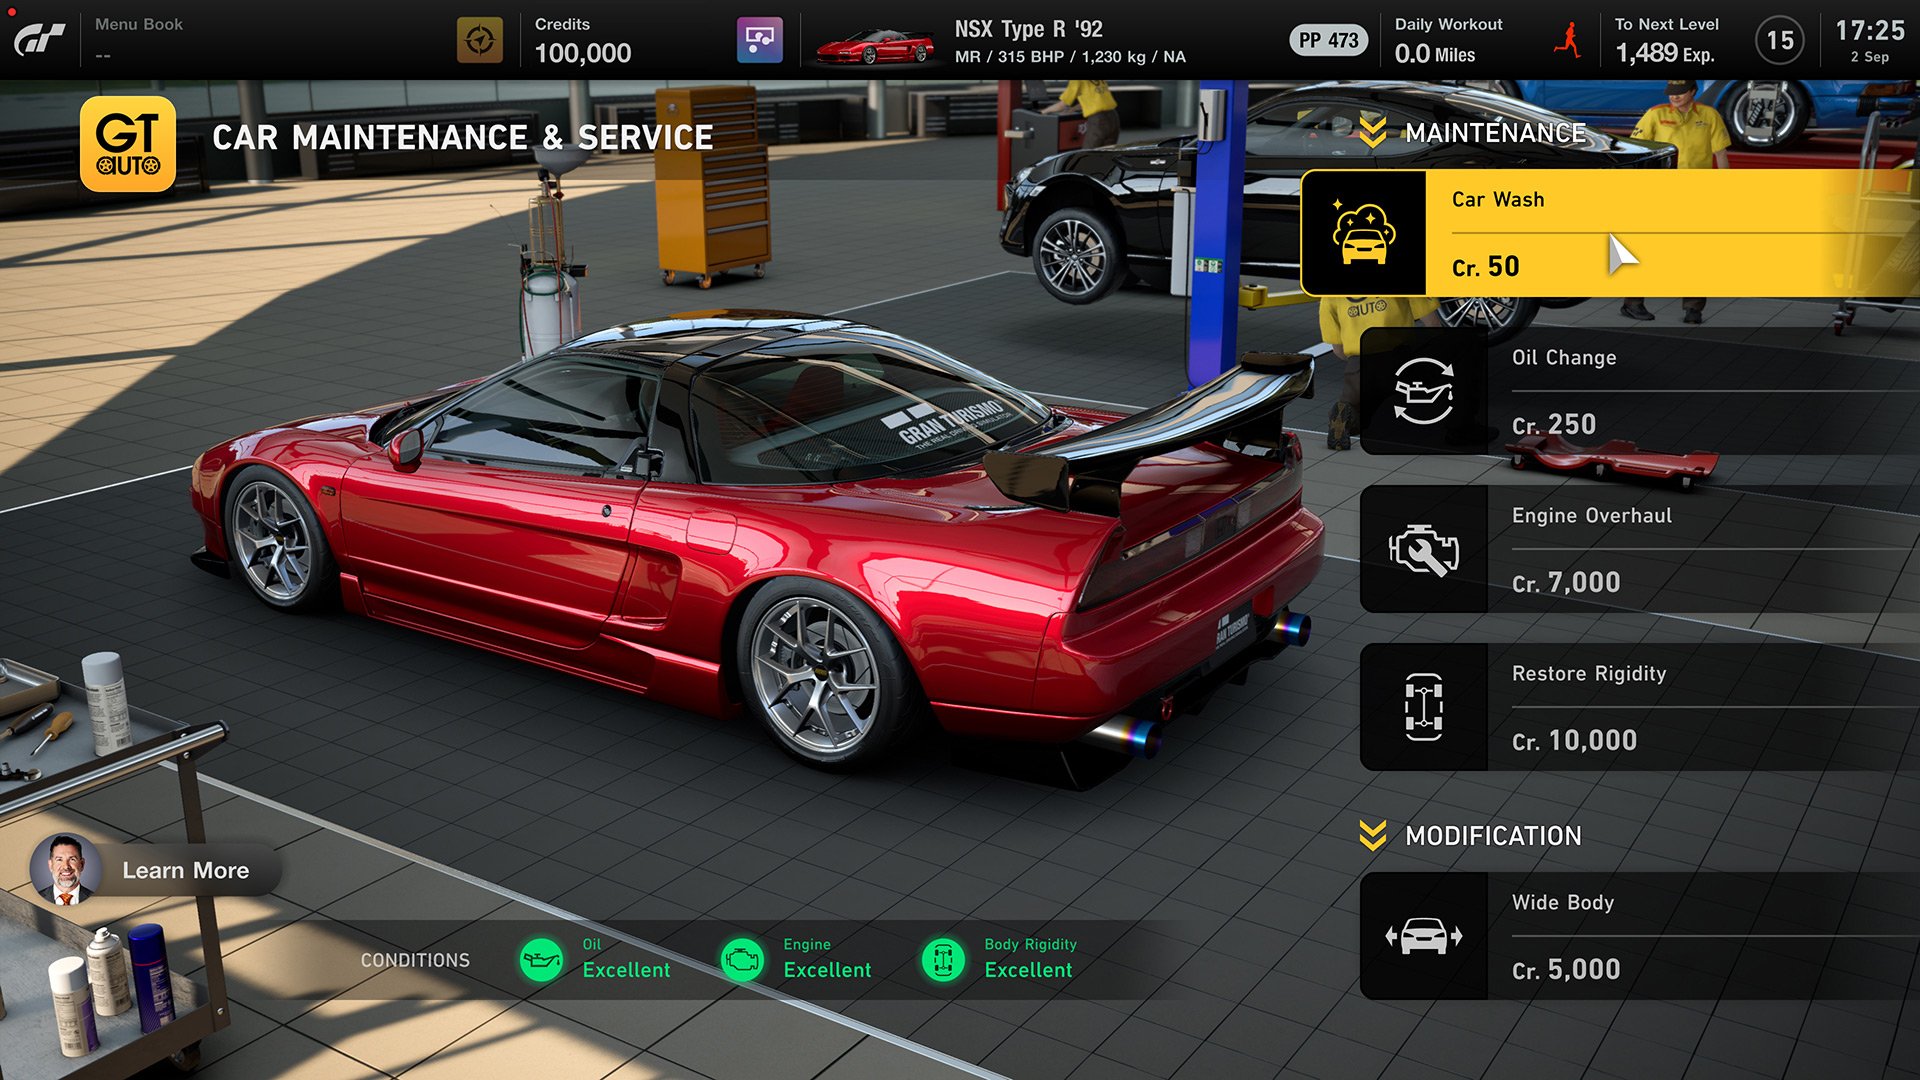 Gran Turismo 7’s New Features Detailed: Used Cars, Body Upgrades